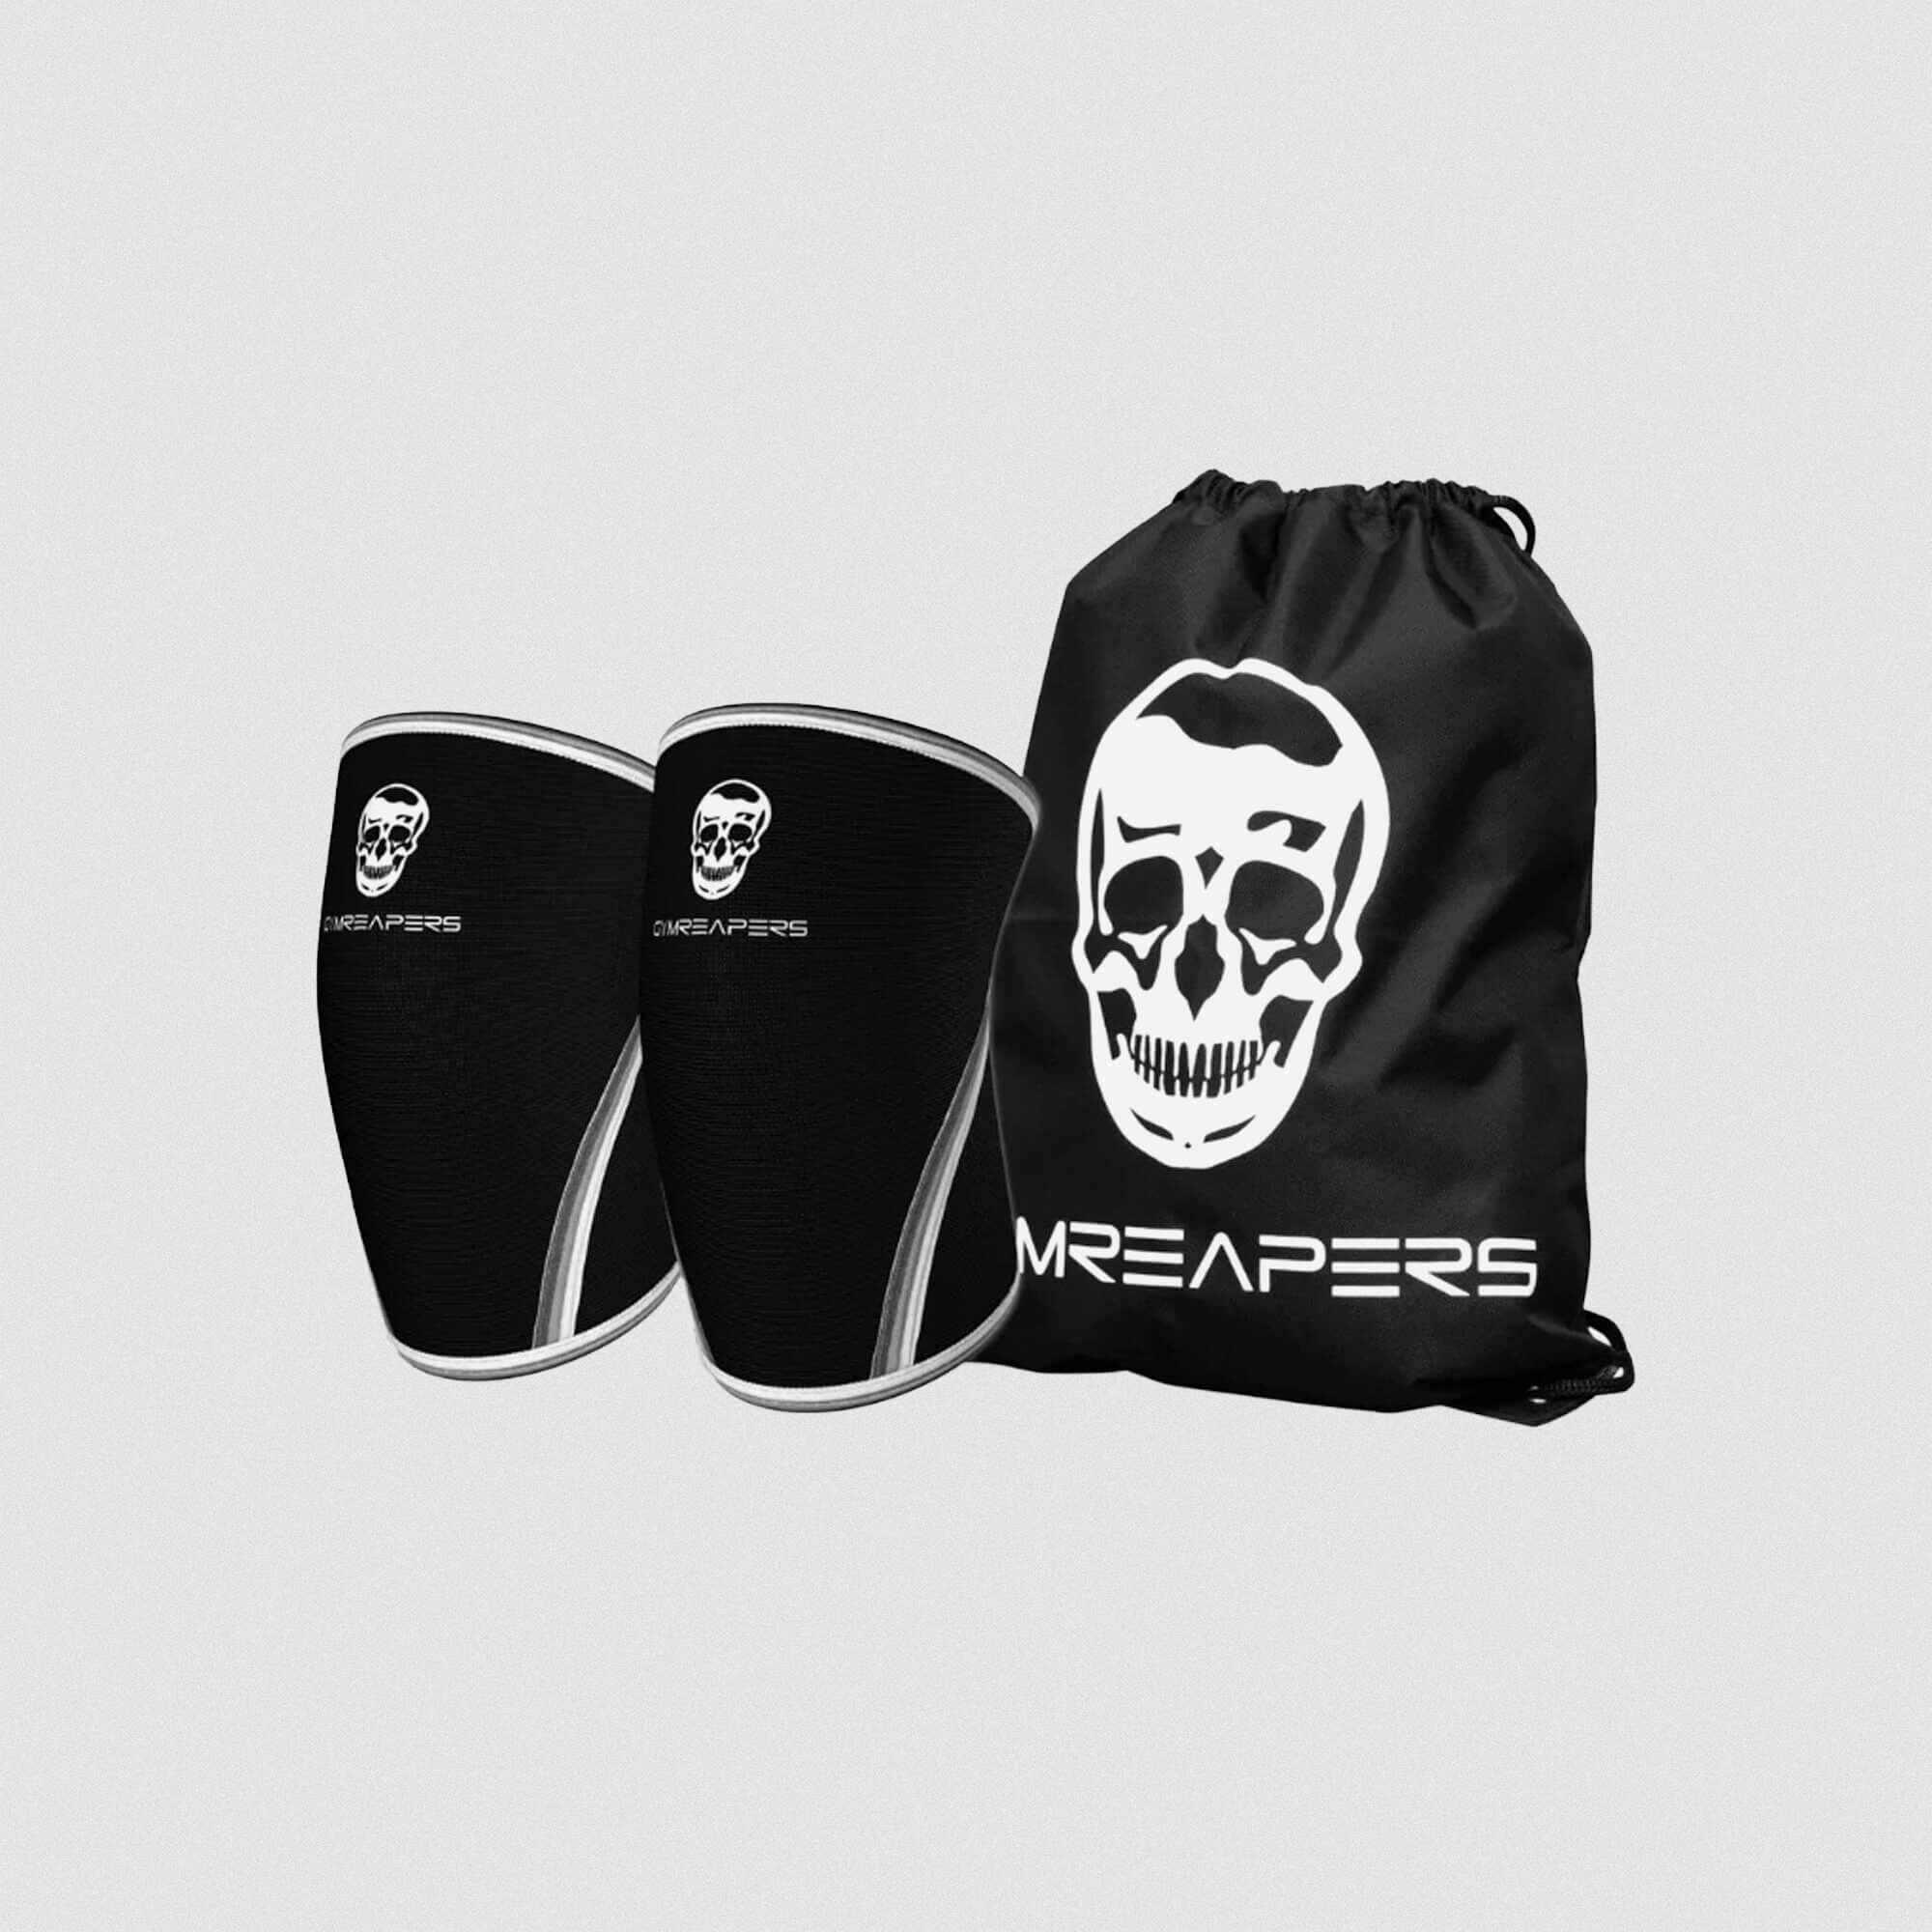 7mm knee sleeves black white with carry bag